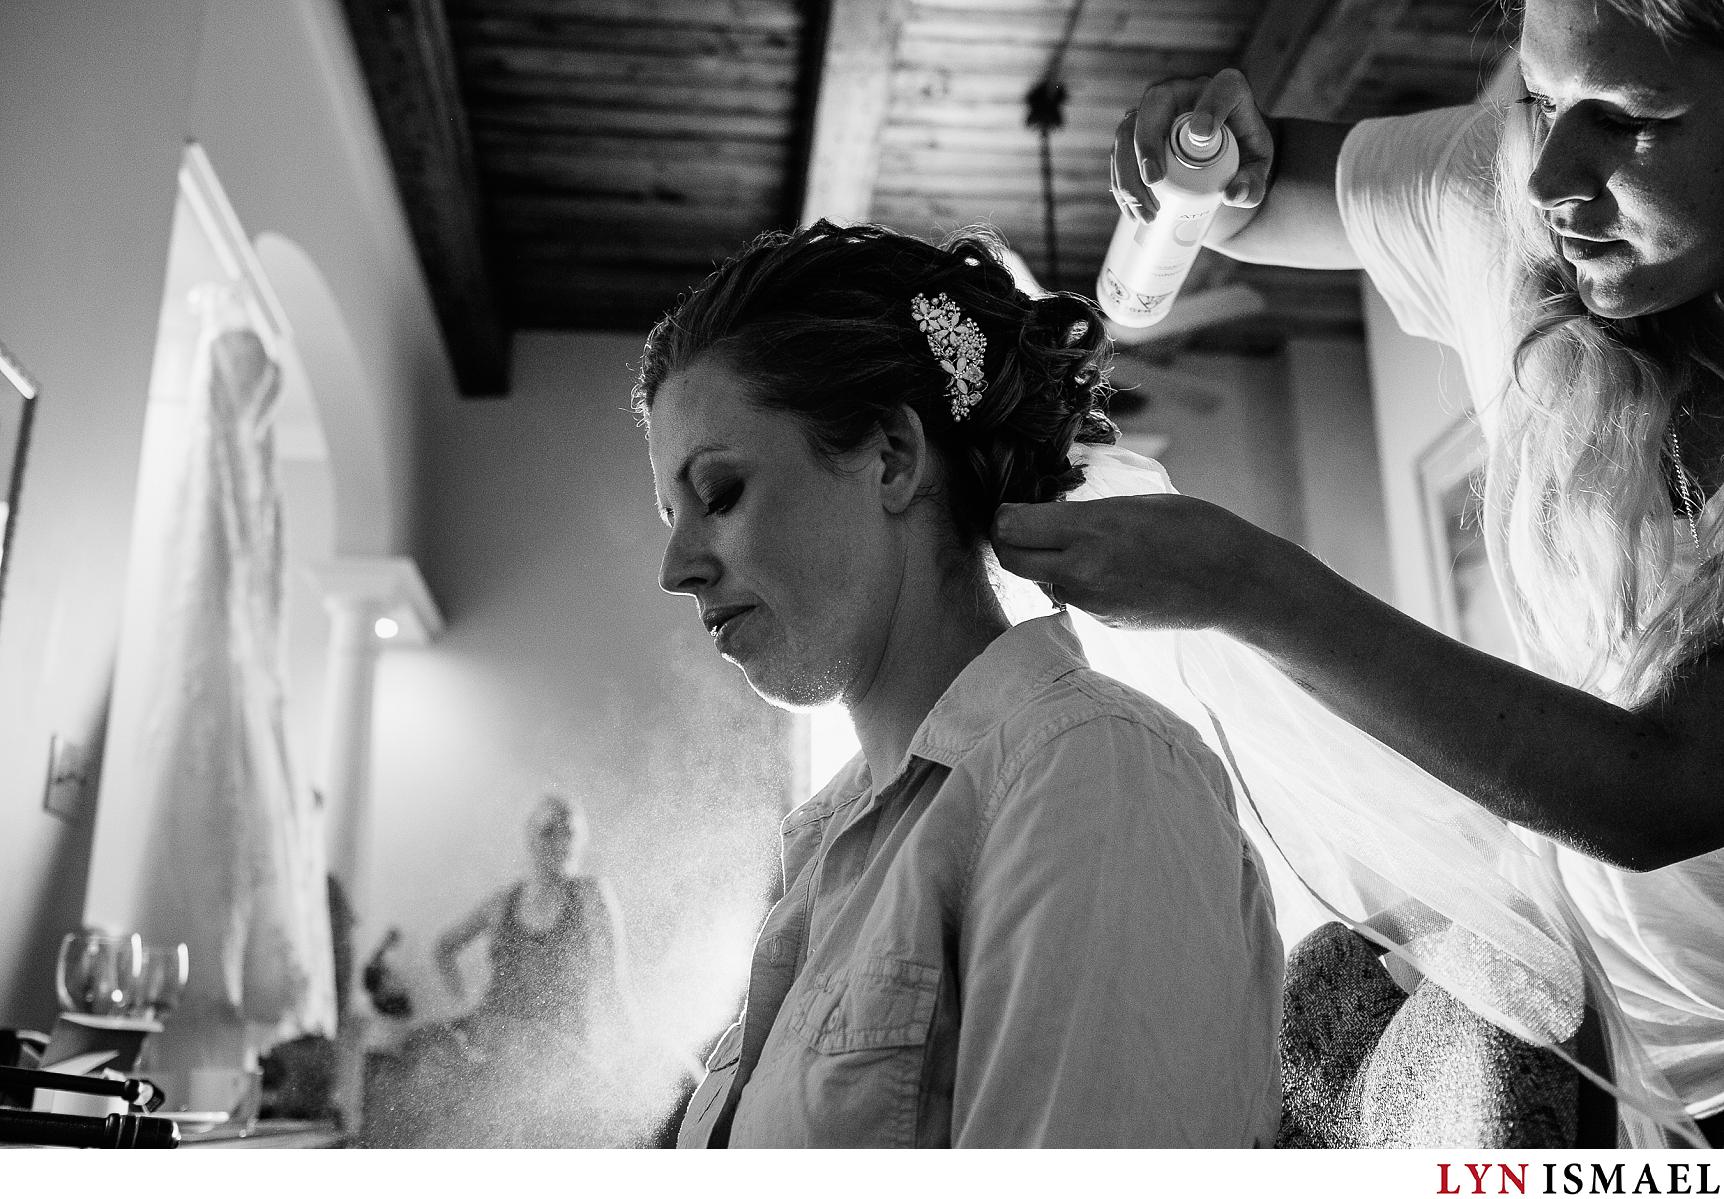 A bride gets her hair done before her wedding ceremony.